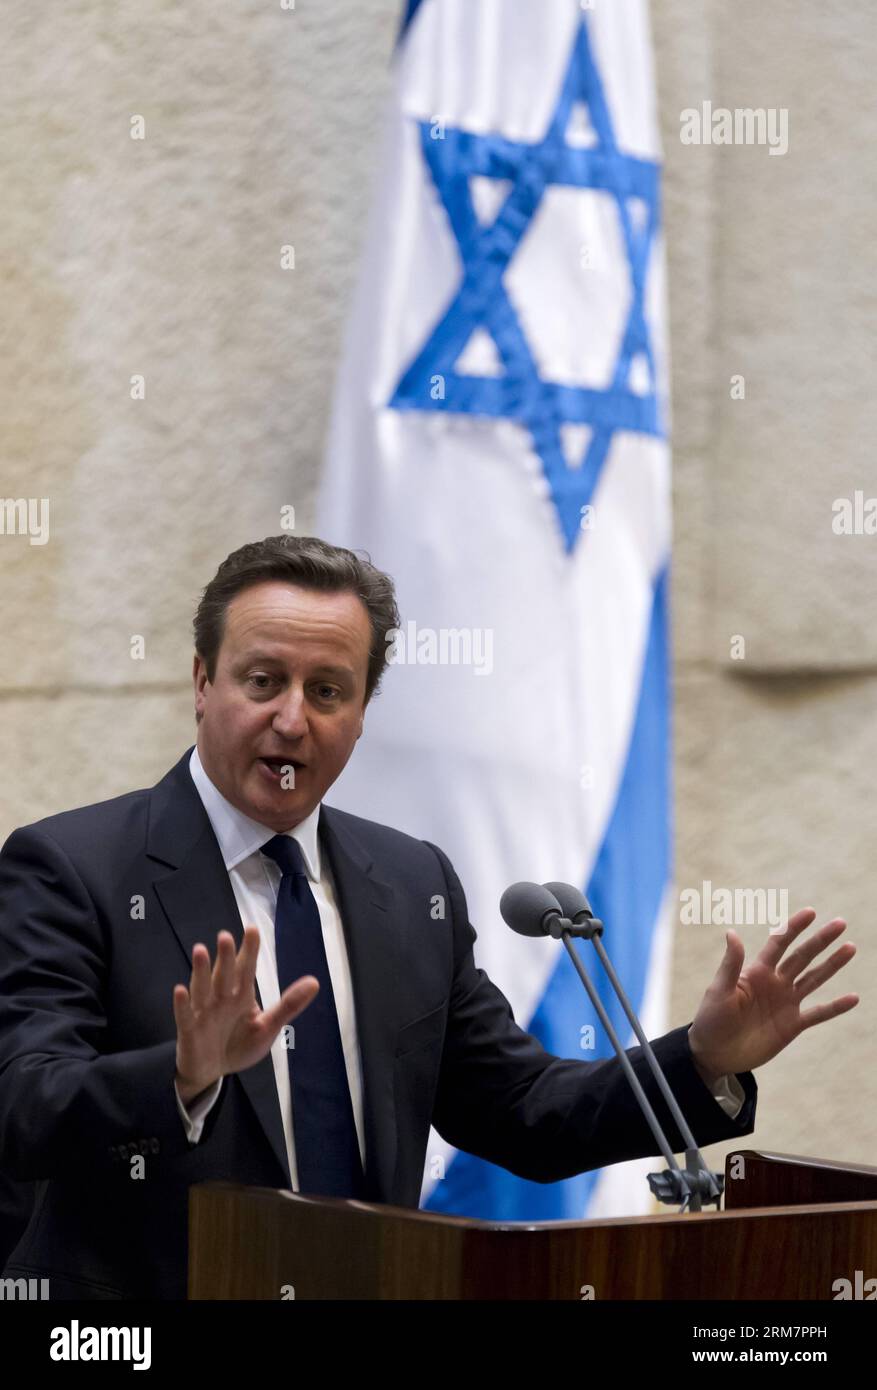 (140312) -- JERUSALEM, March 12, 2014 (Xinhua) -- Visiting British Prime Minister David Cameron addresses the Israeli Knesset (parliament) in Jerusalem, on March 12, 2014. British Prime Minister David Cameron on Wednesday called on the Israeli Knesset (parliament) to reach out for historic peace with Palestinians, during his first visit to Israel as prime minister. (Xinhua/POOL/Jim Hollander) MIDEAST-JERUSALEM-ISRAEL-UK-VISIT PUBLICATIONxNOTxINxCHN   Jerusalem March 12 2014 XINHUA Visiting British Prime Ministers David Cameron addresses The Israeli Knesset Parliament in Jerusalem ON March 12 2 Stock Photo